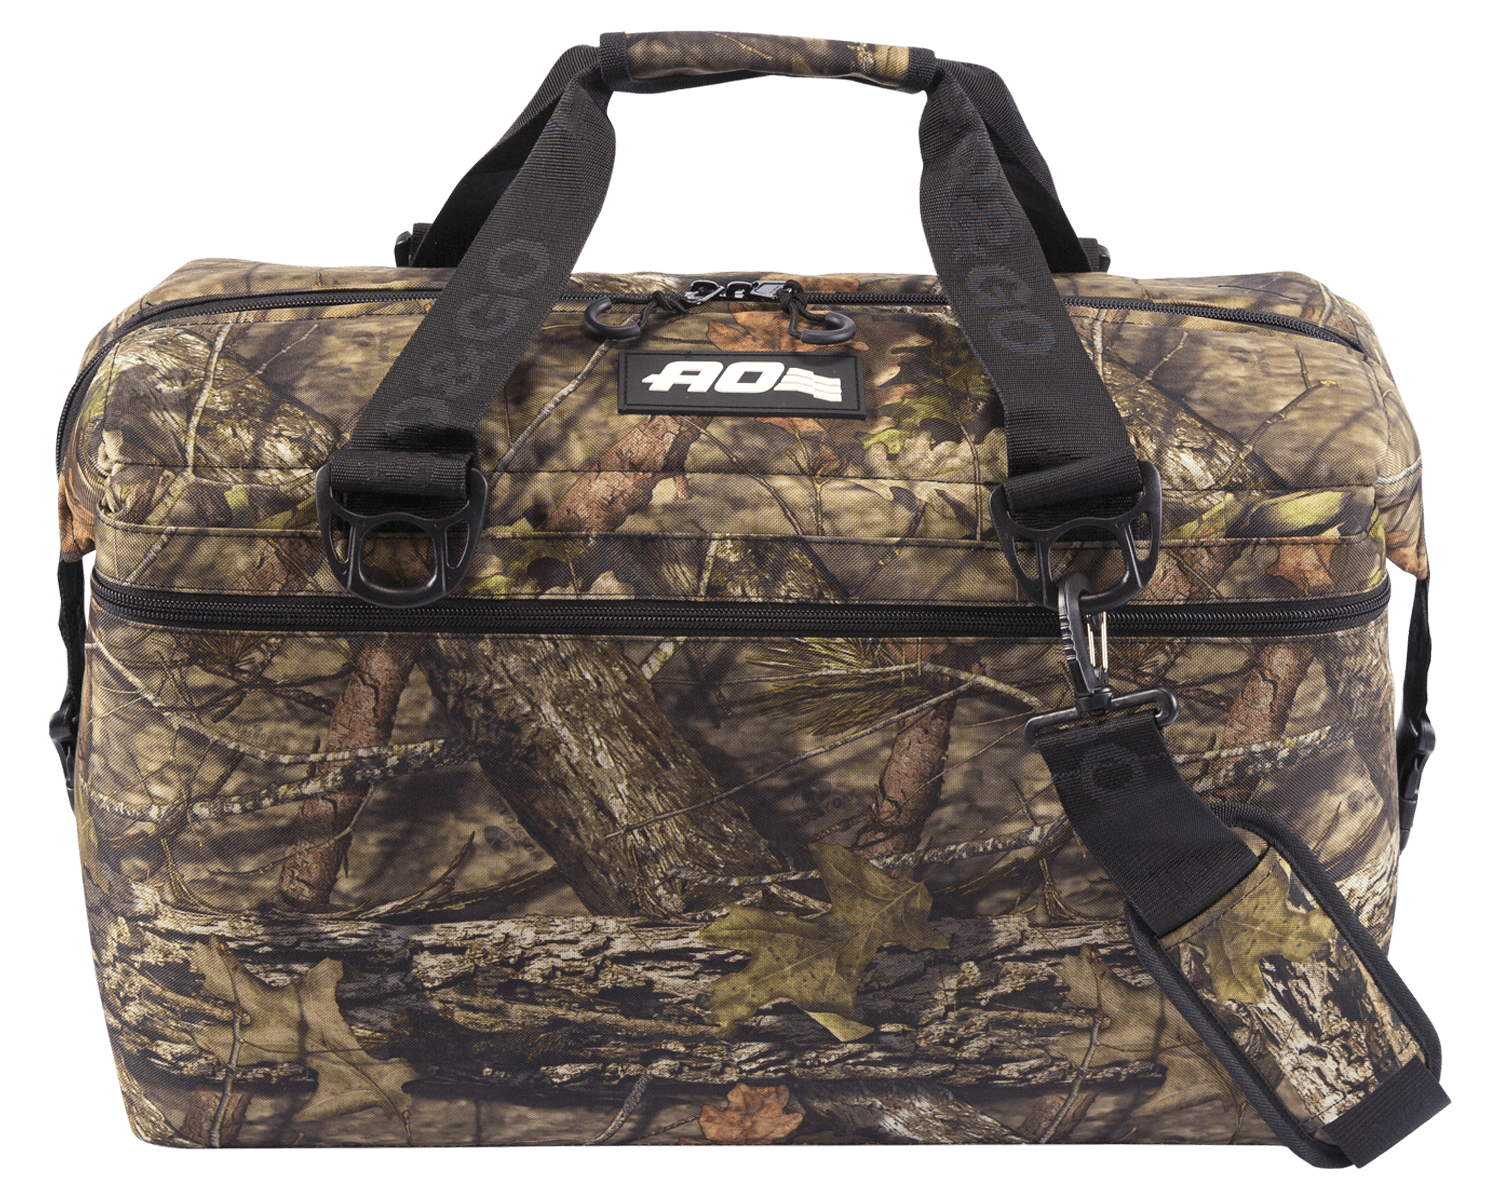 Mossy Oak Break-Up Country Series 48 Pack Cooler - AO Coolers